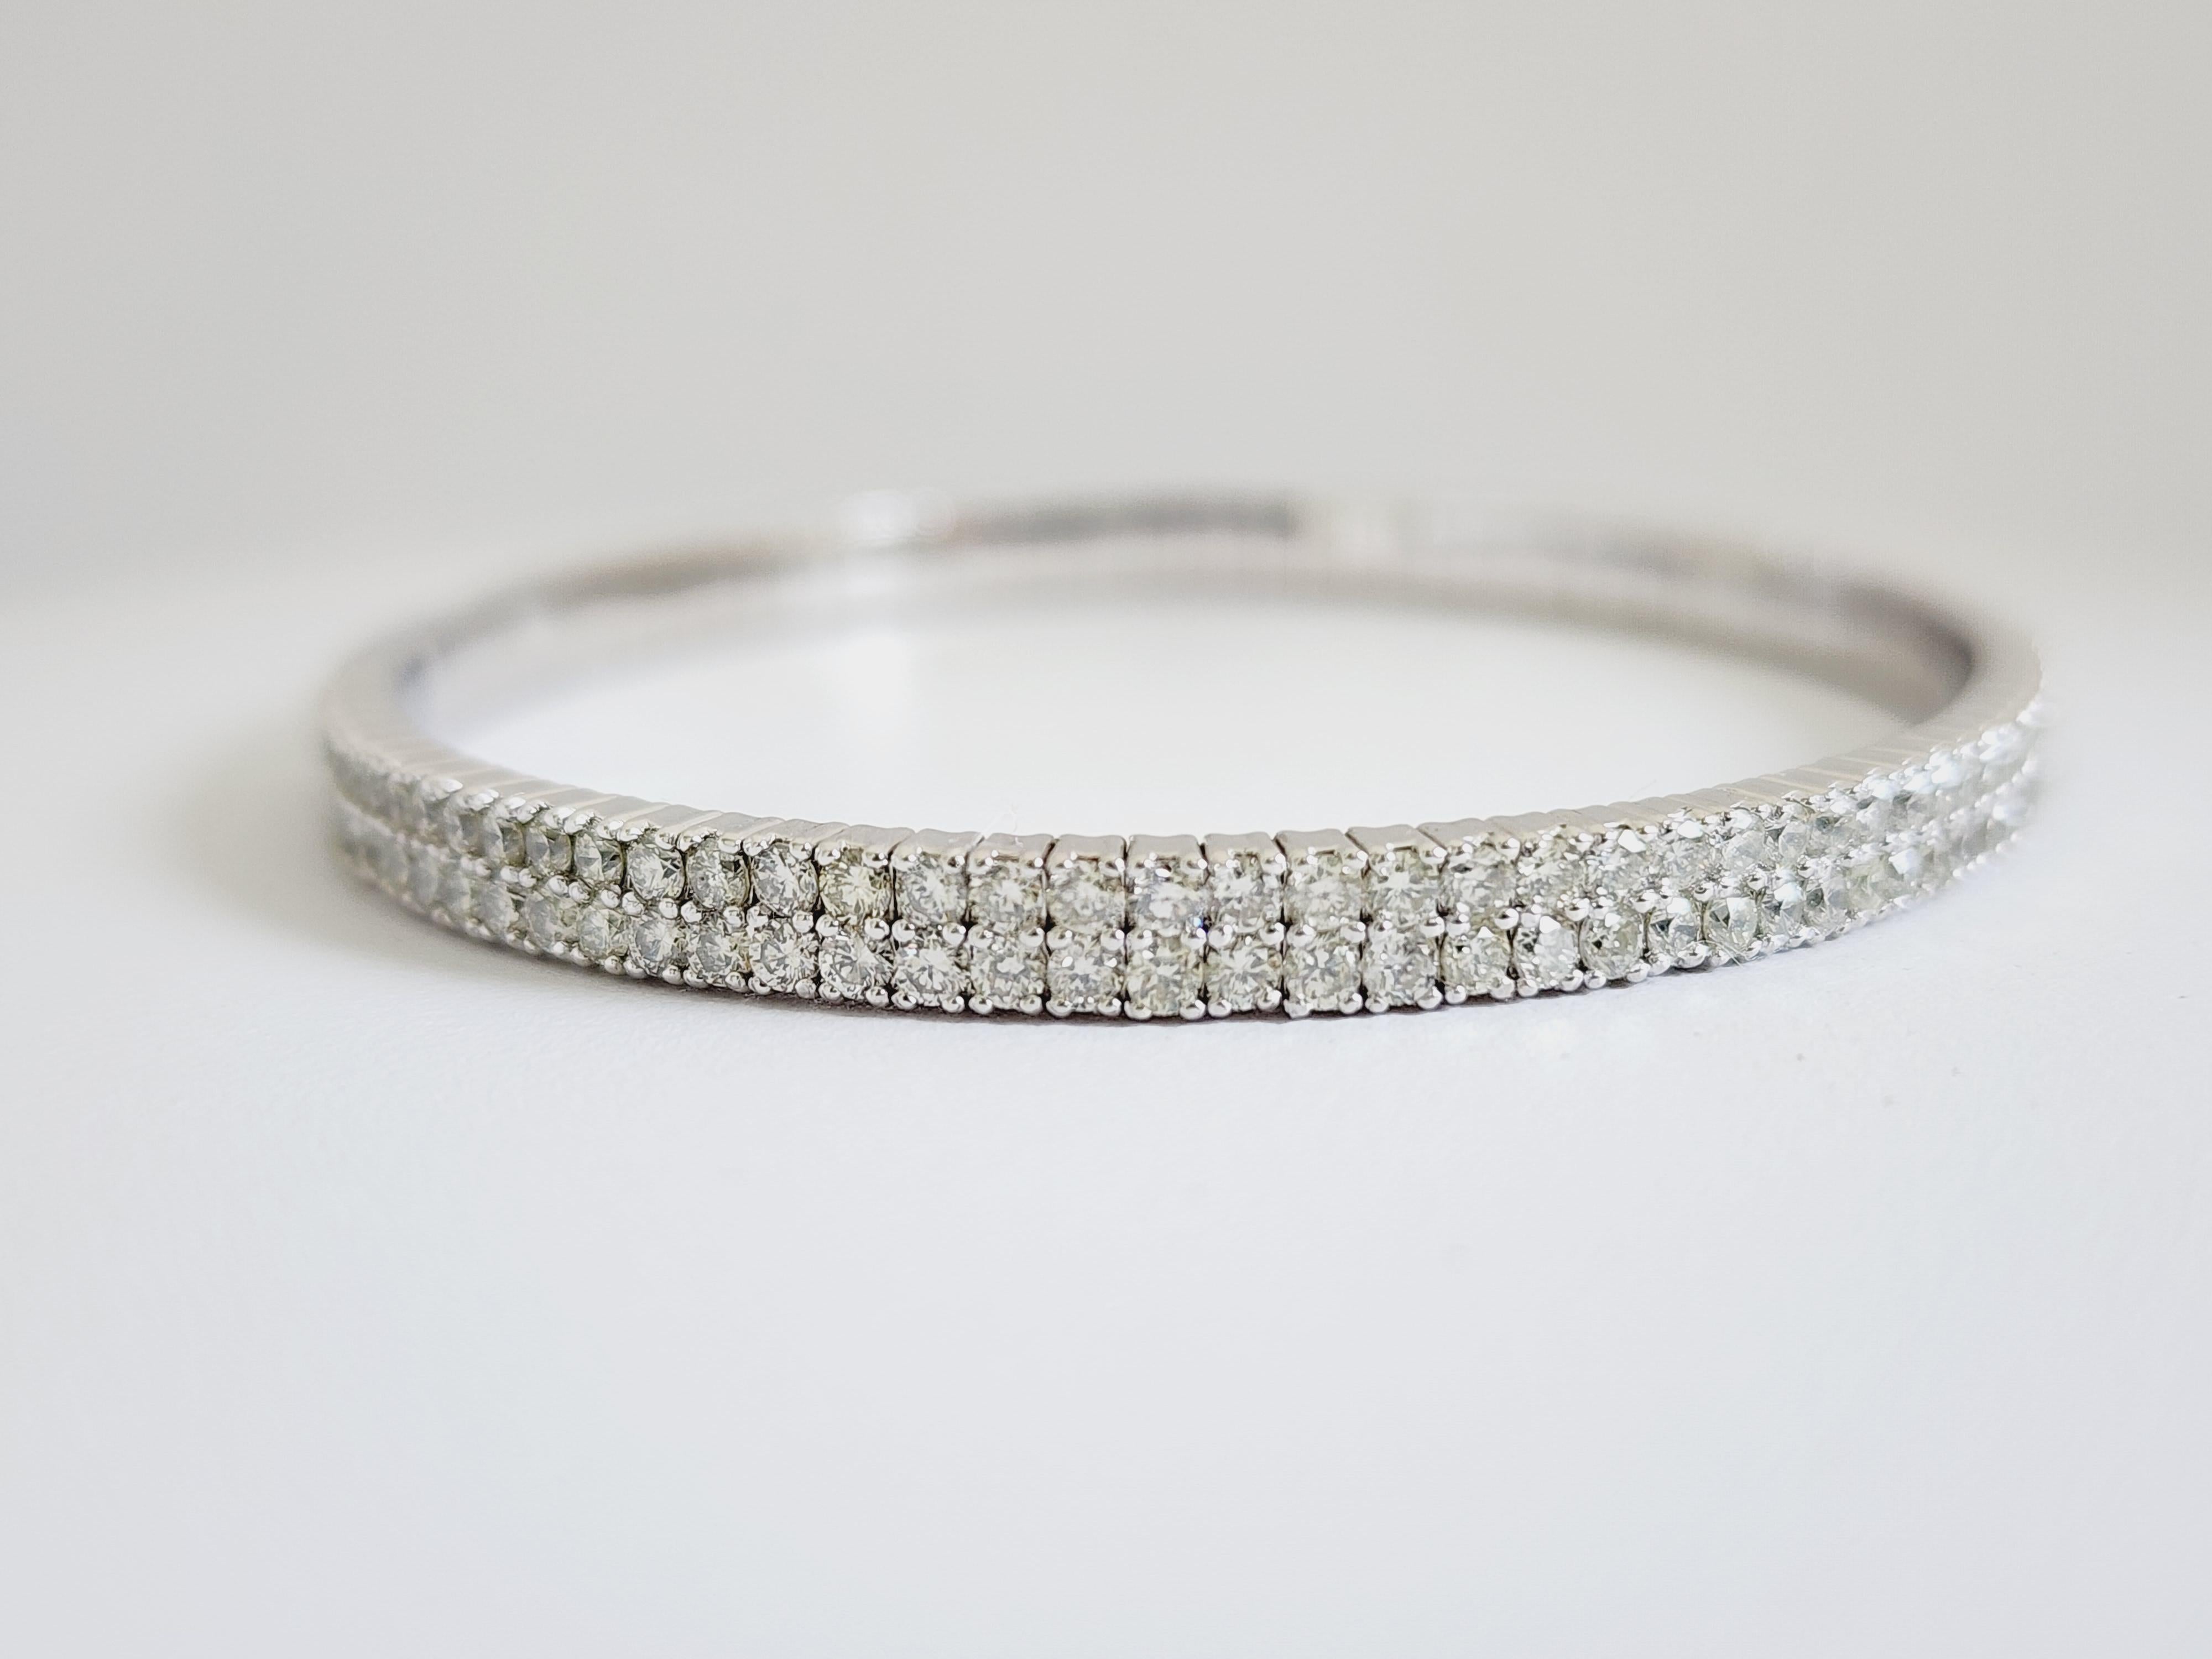 4.85 Carat Double Row Flexible Bangle White Gold 14 Karat Bracelet In New Condition For Sale In Great Neck, NY